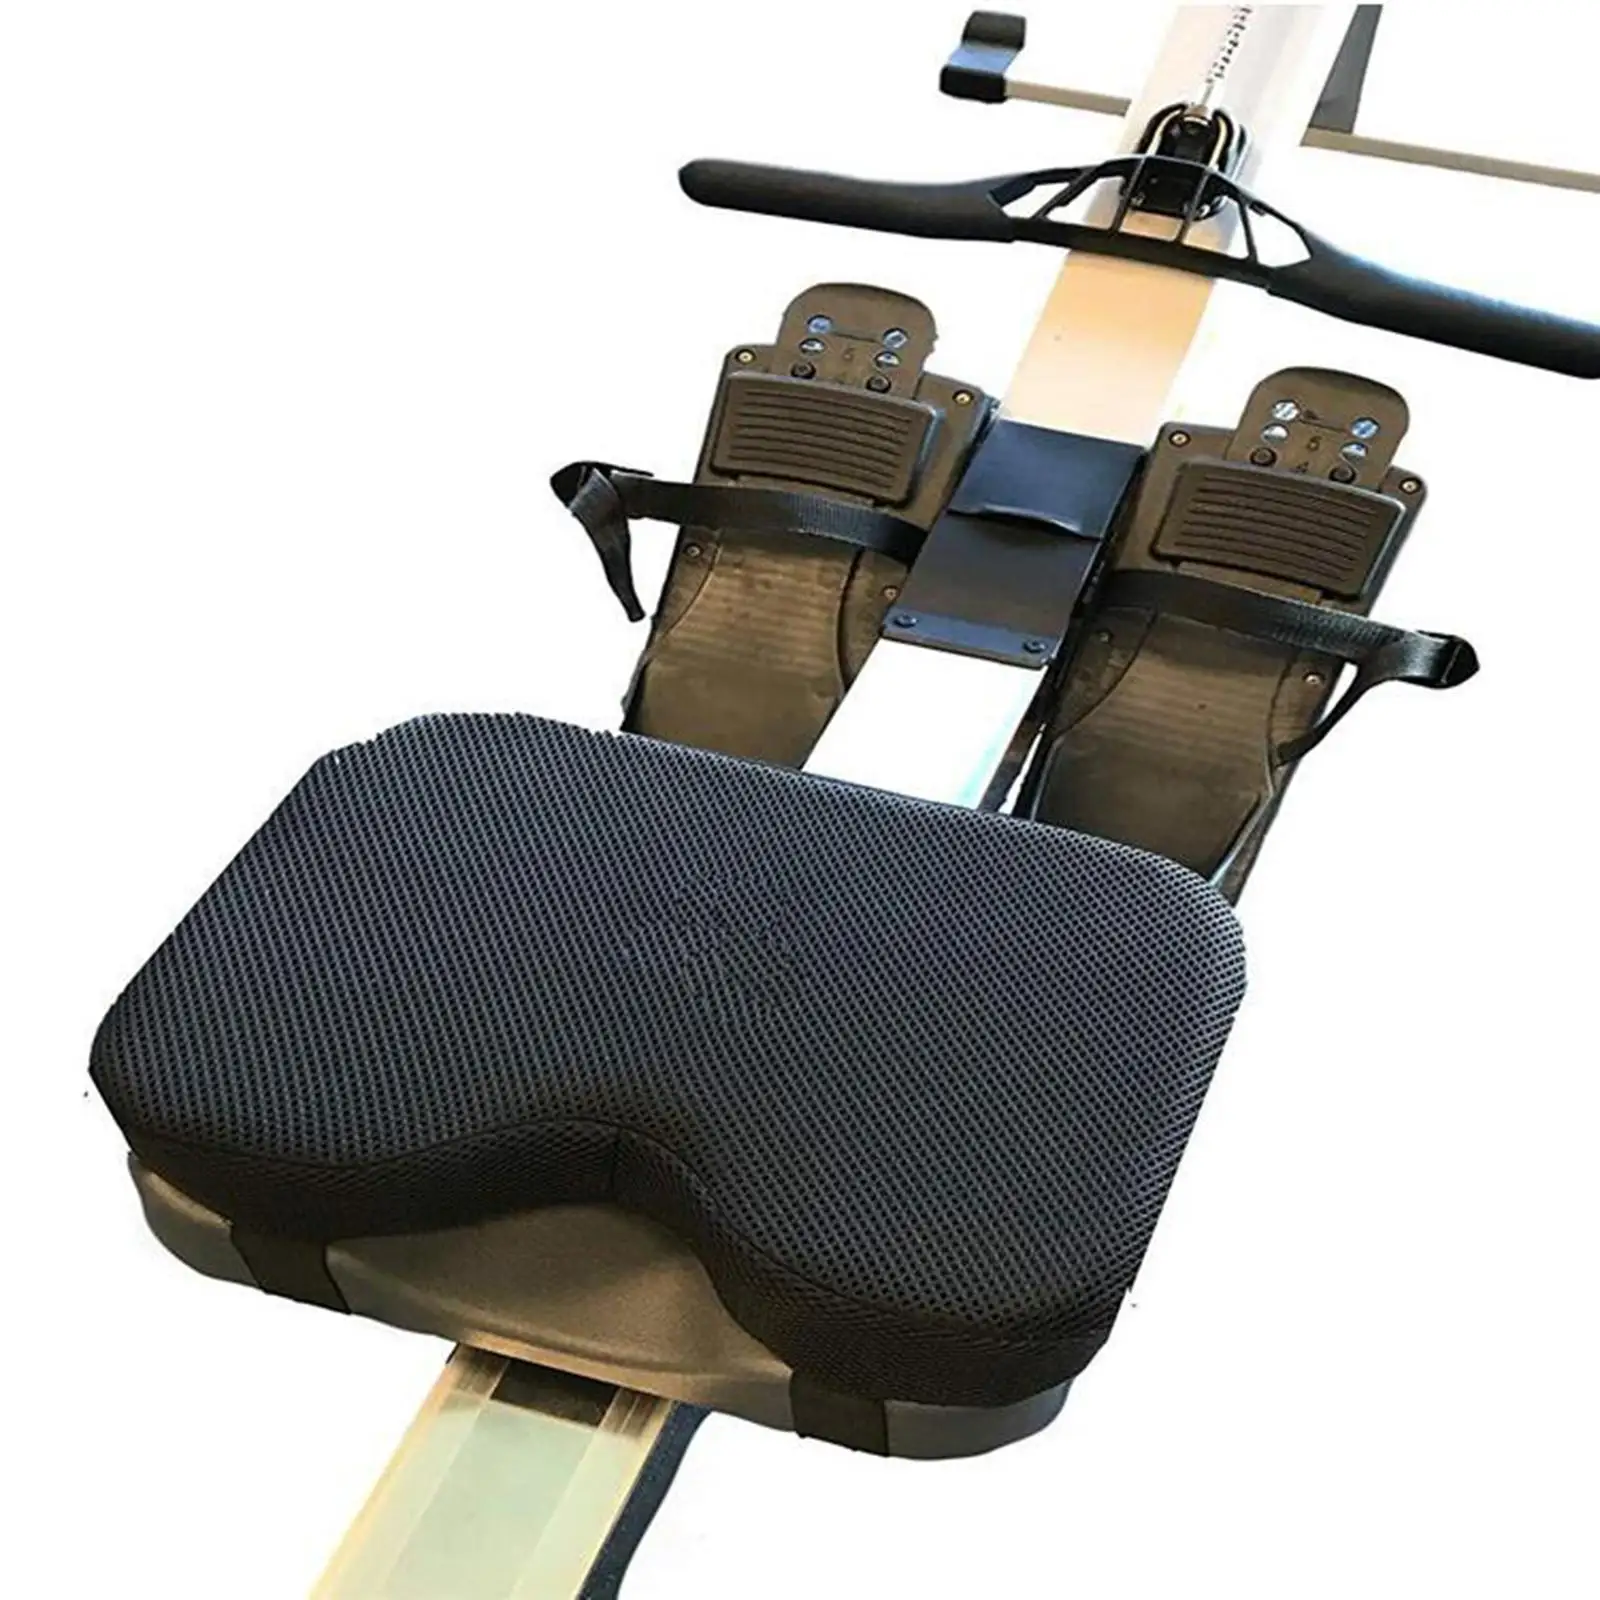 1 Piece Rowing Machine Seat Cushion Pad Rower Accessories Comfortable Soft Non